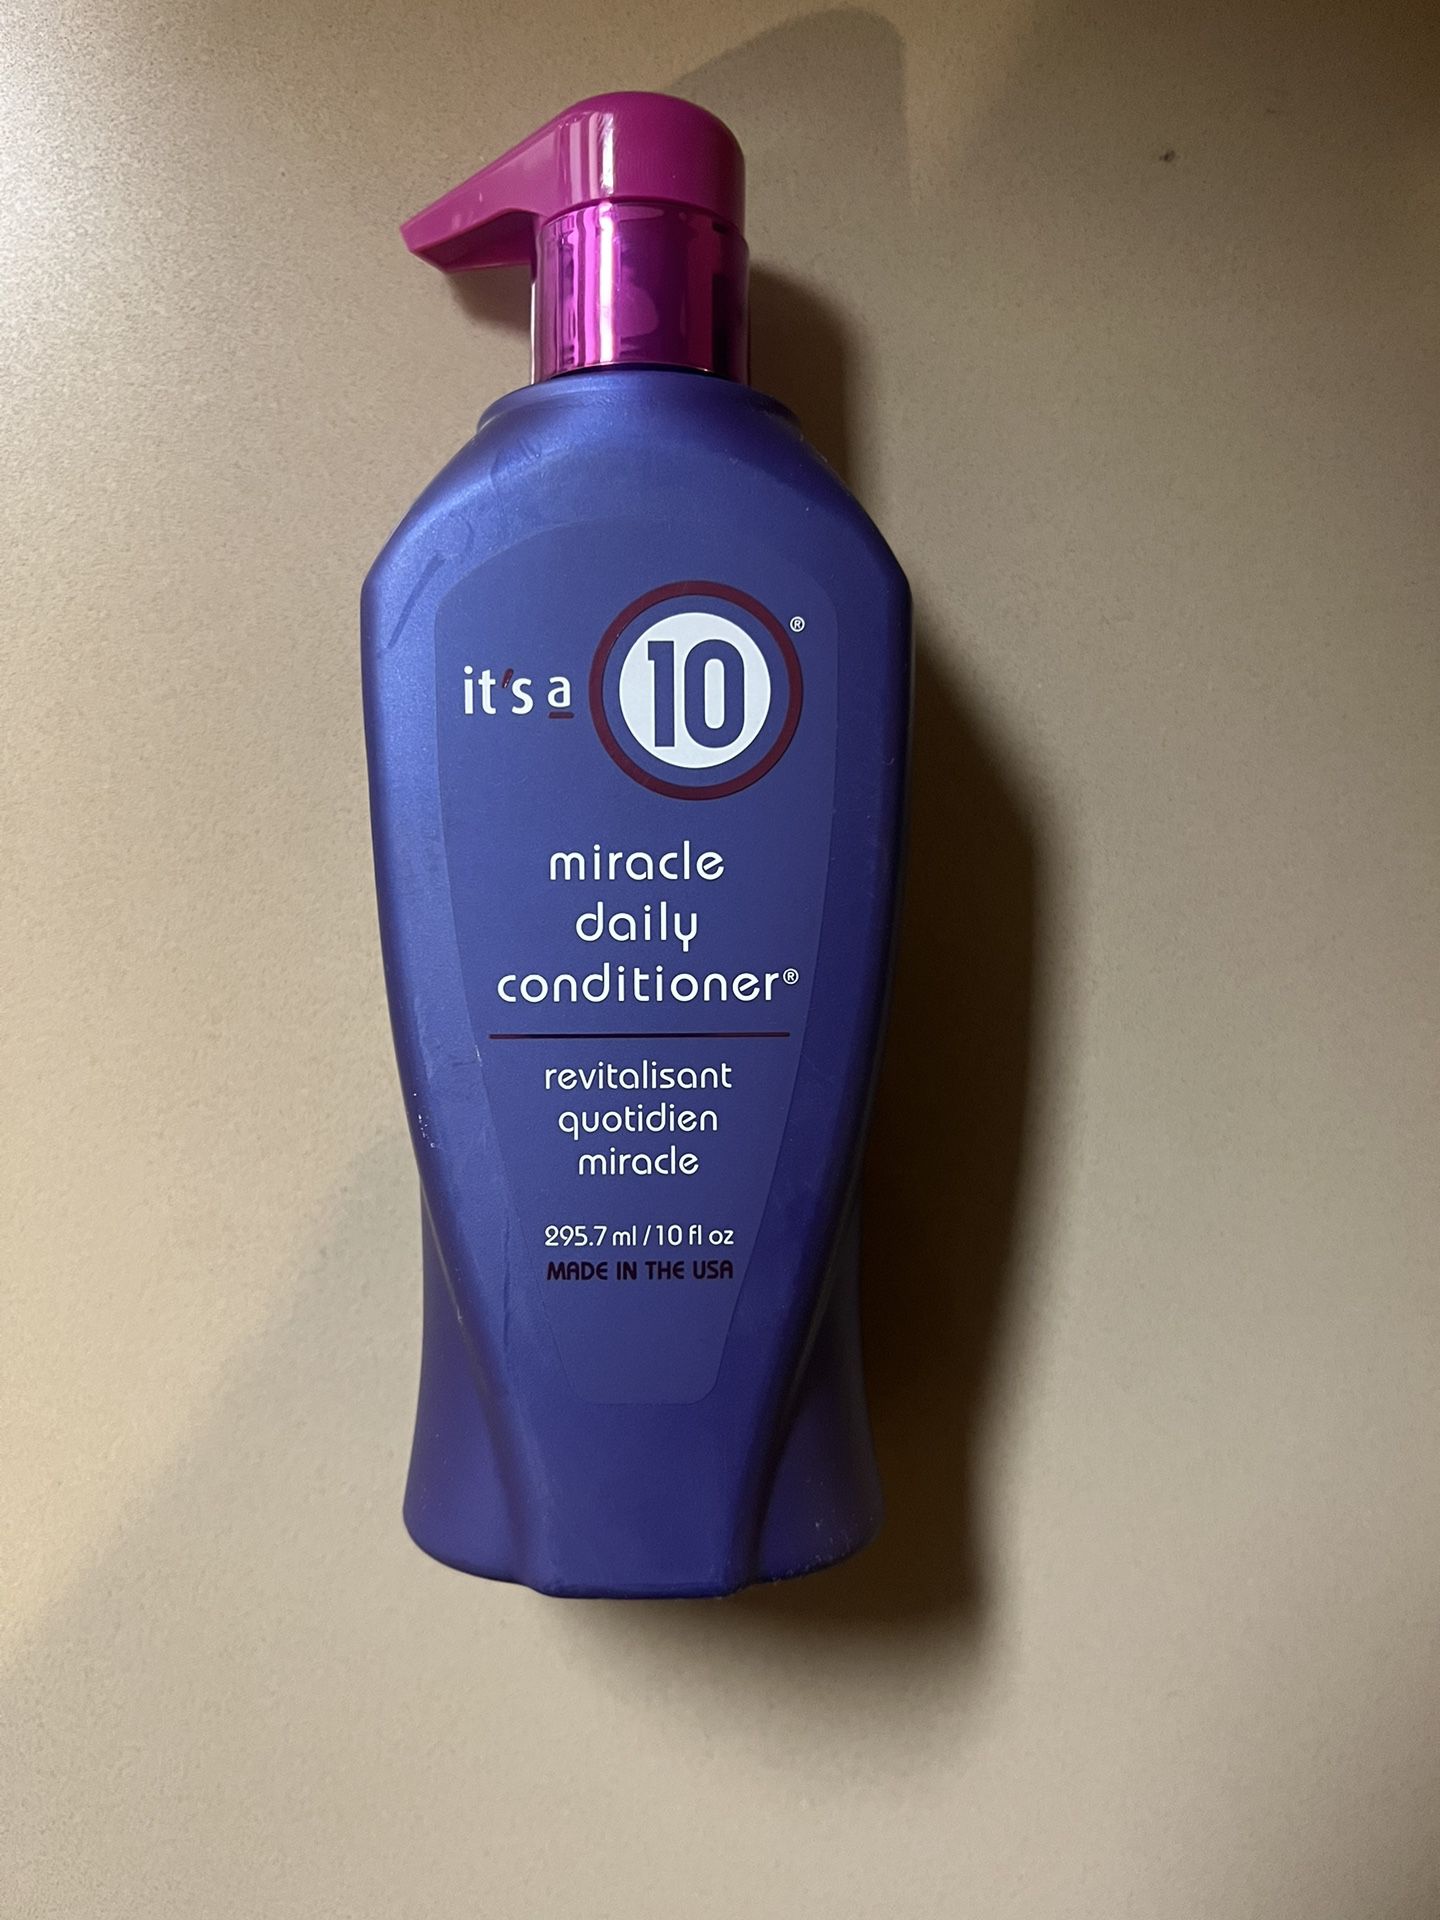 It’s A Miracle 10 ( Miracle Daily Conditioner)10 fl oz $10